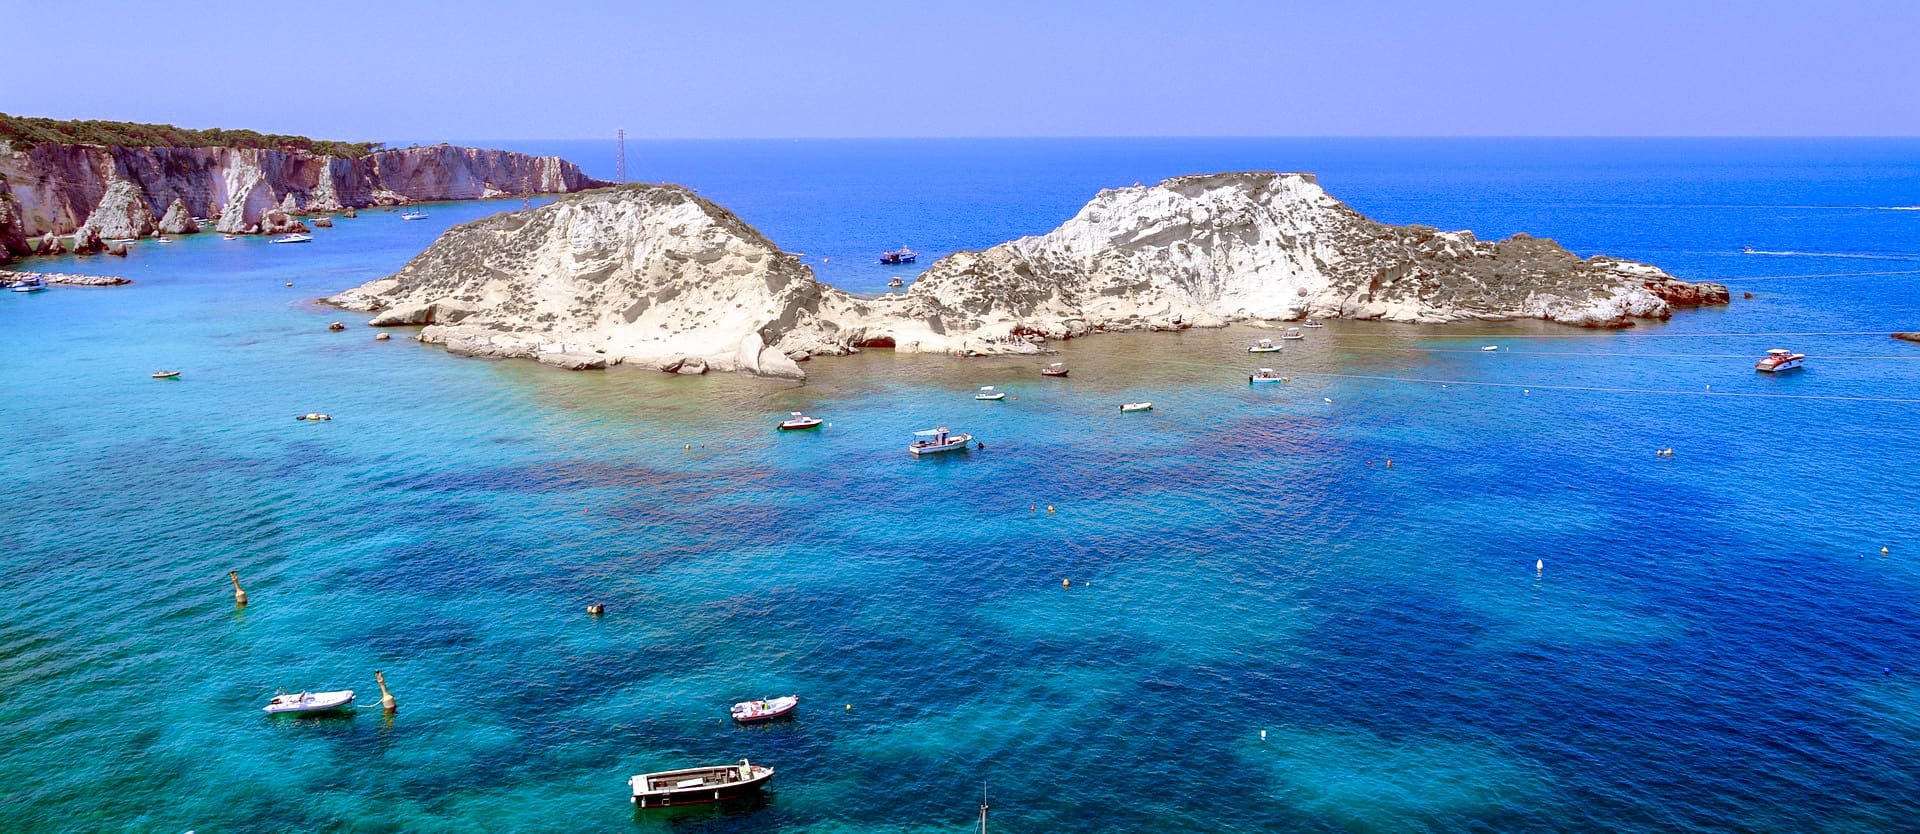 The Termiti Islands are the place where you can visit 3 islands in italy at one time